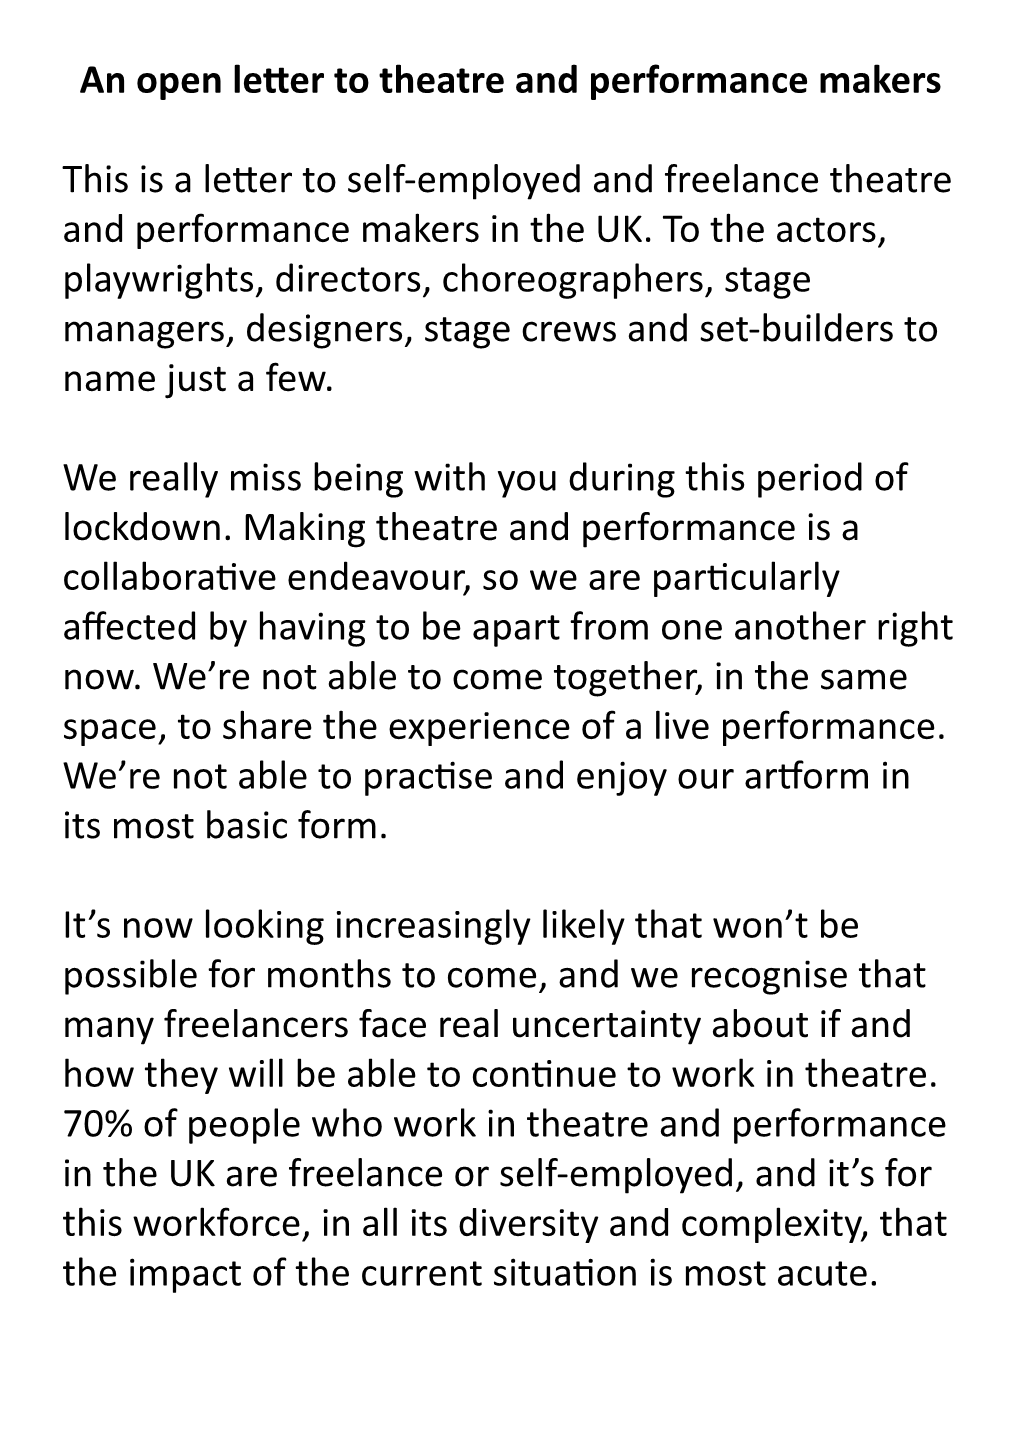 An Open Letter to Theatre and Performance Makers 24 Point Font